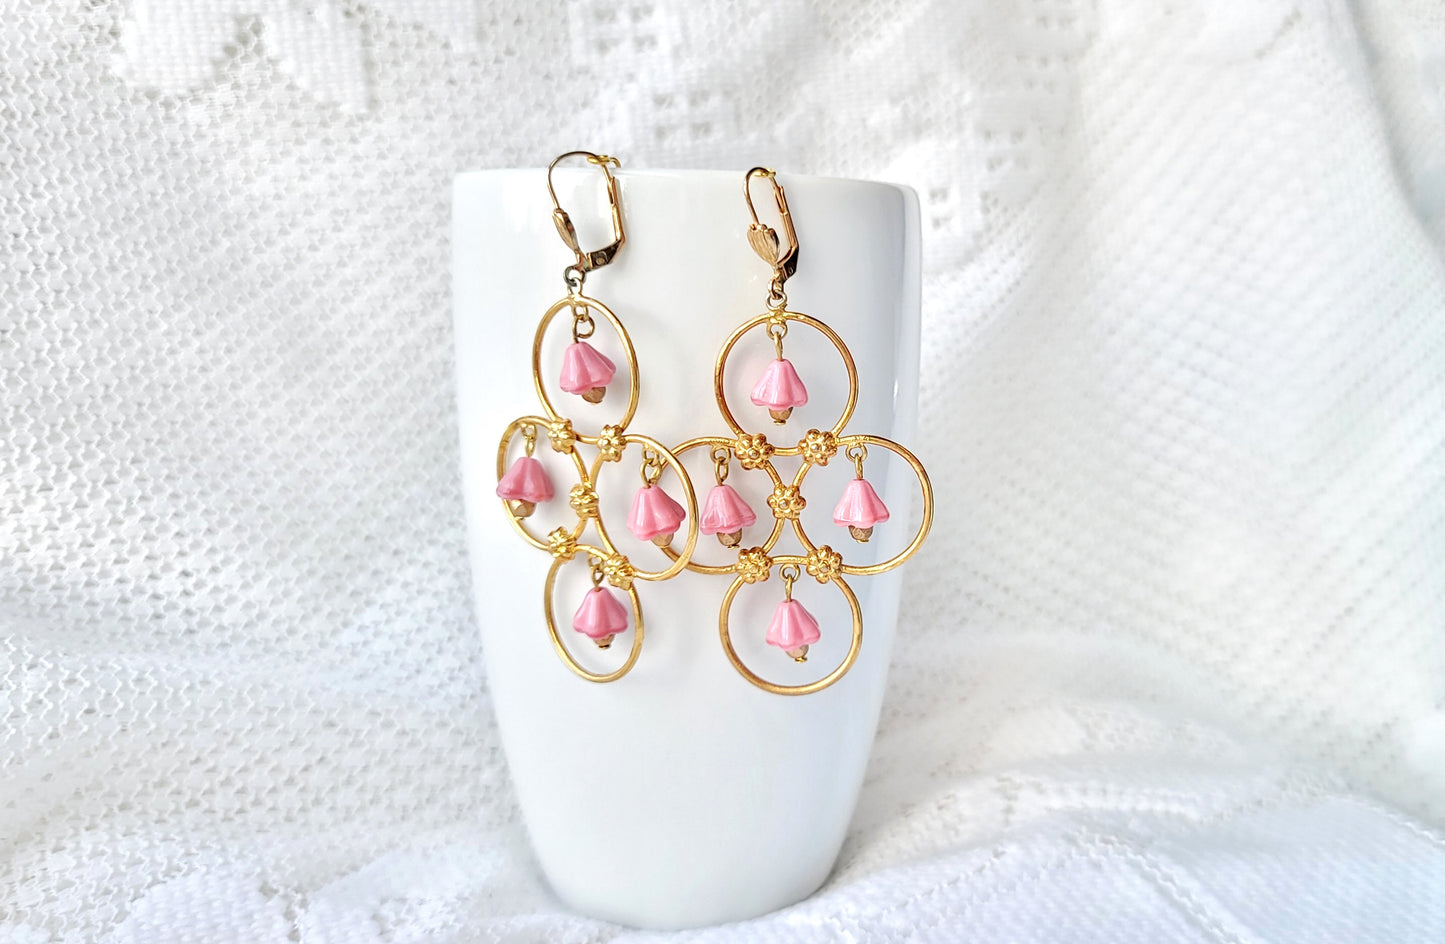 Large Pink Flower Chandelier Earrings made with Upcycled Gold metal and pink Czech glass flowers 